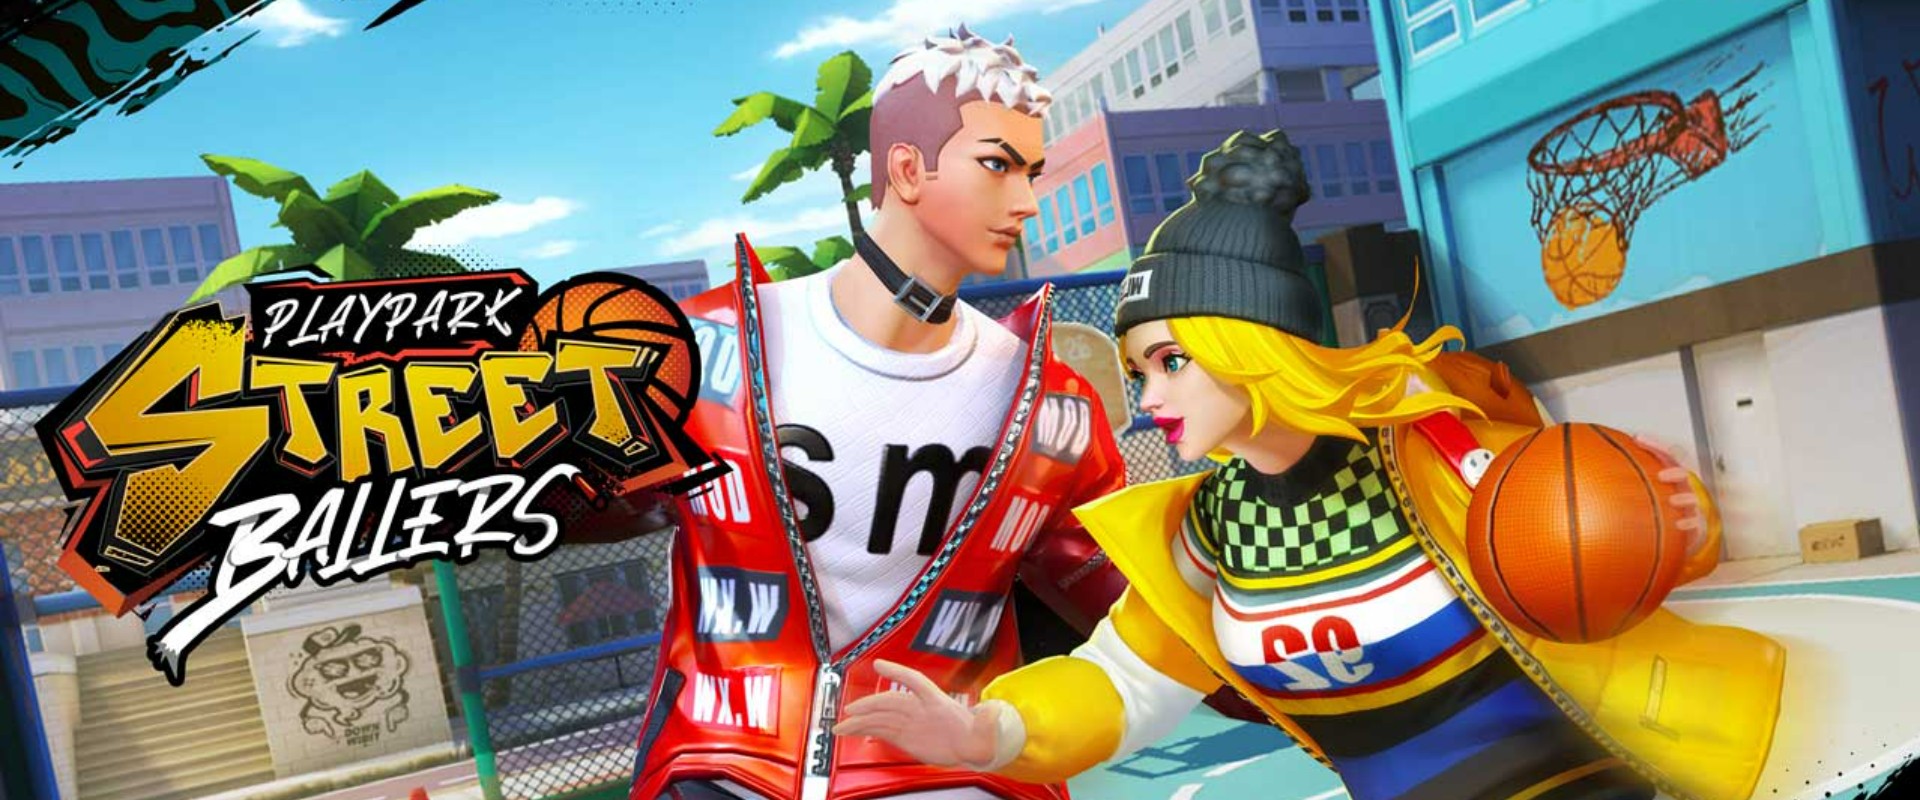 Download & Play PlayPark StreetBallers on PC & Mac with NoxPlayer (Emulator)